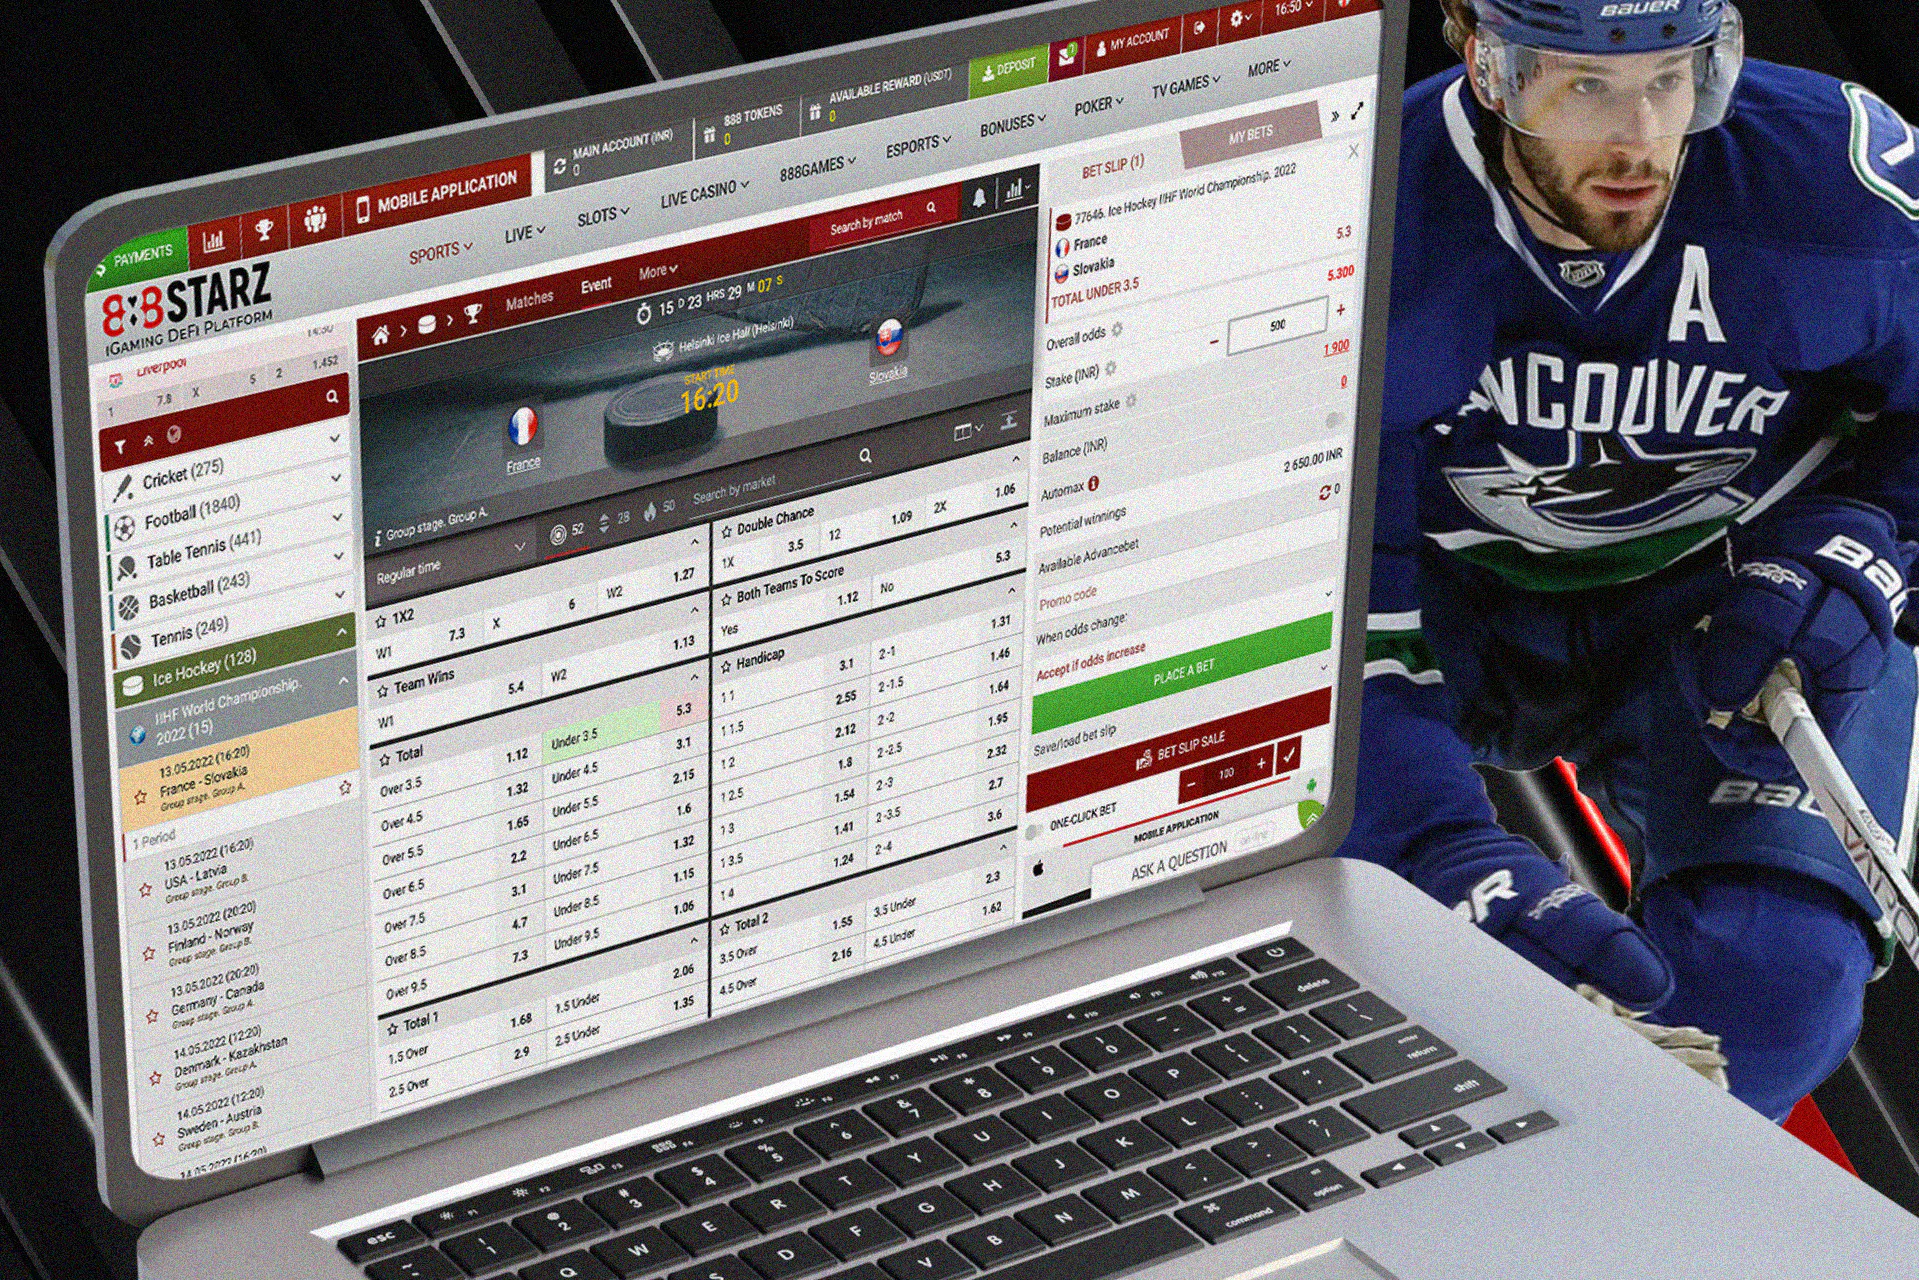 888starz offers betting on hockey in live.